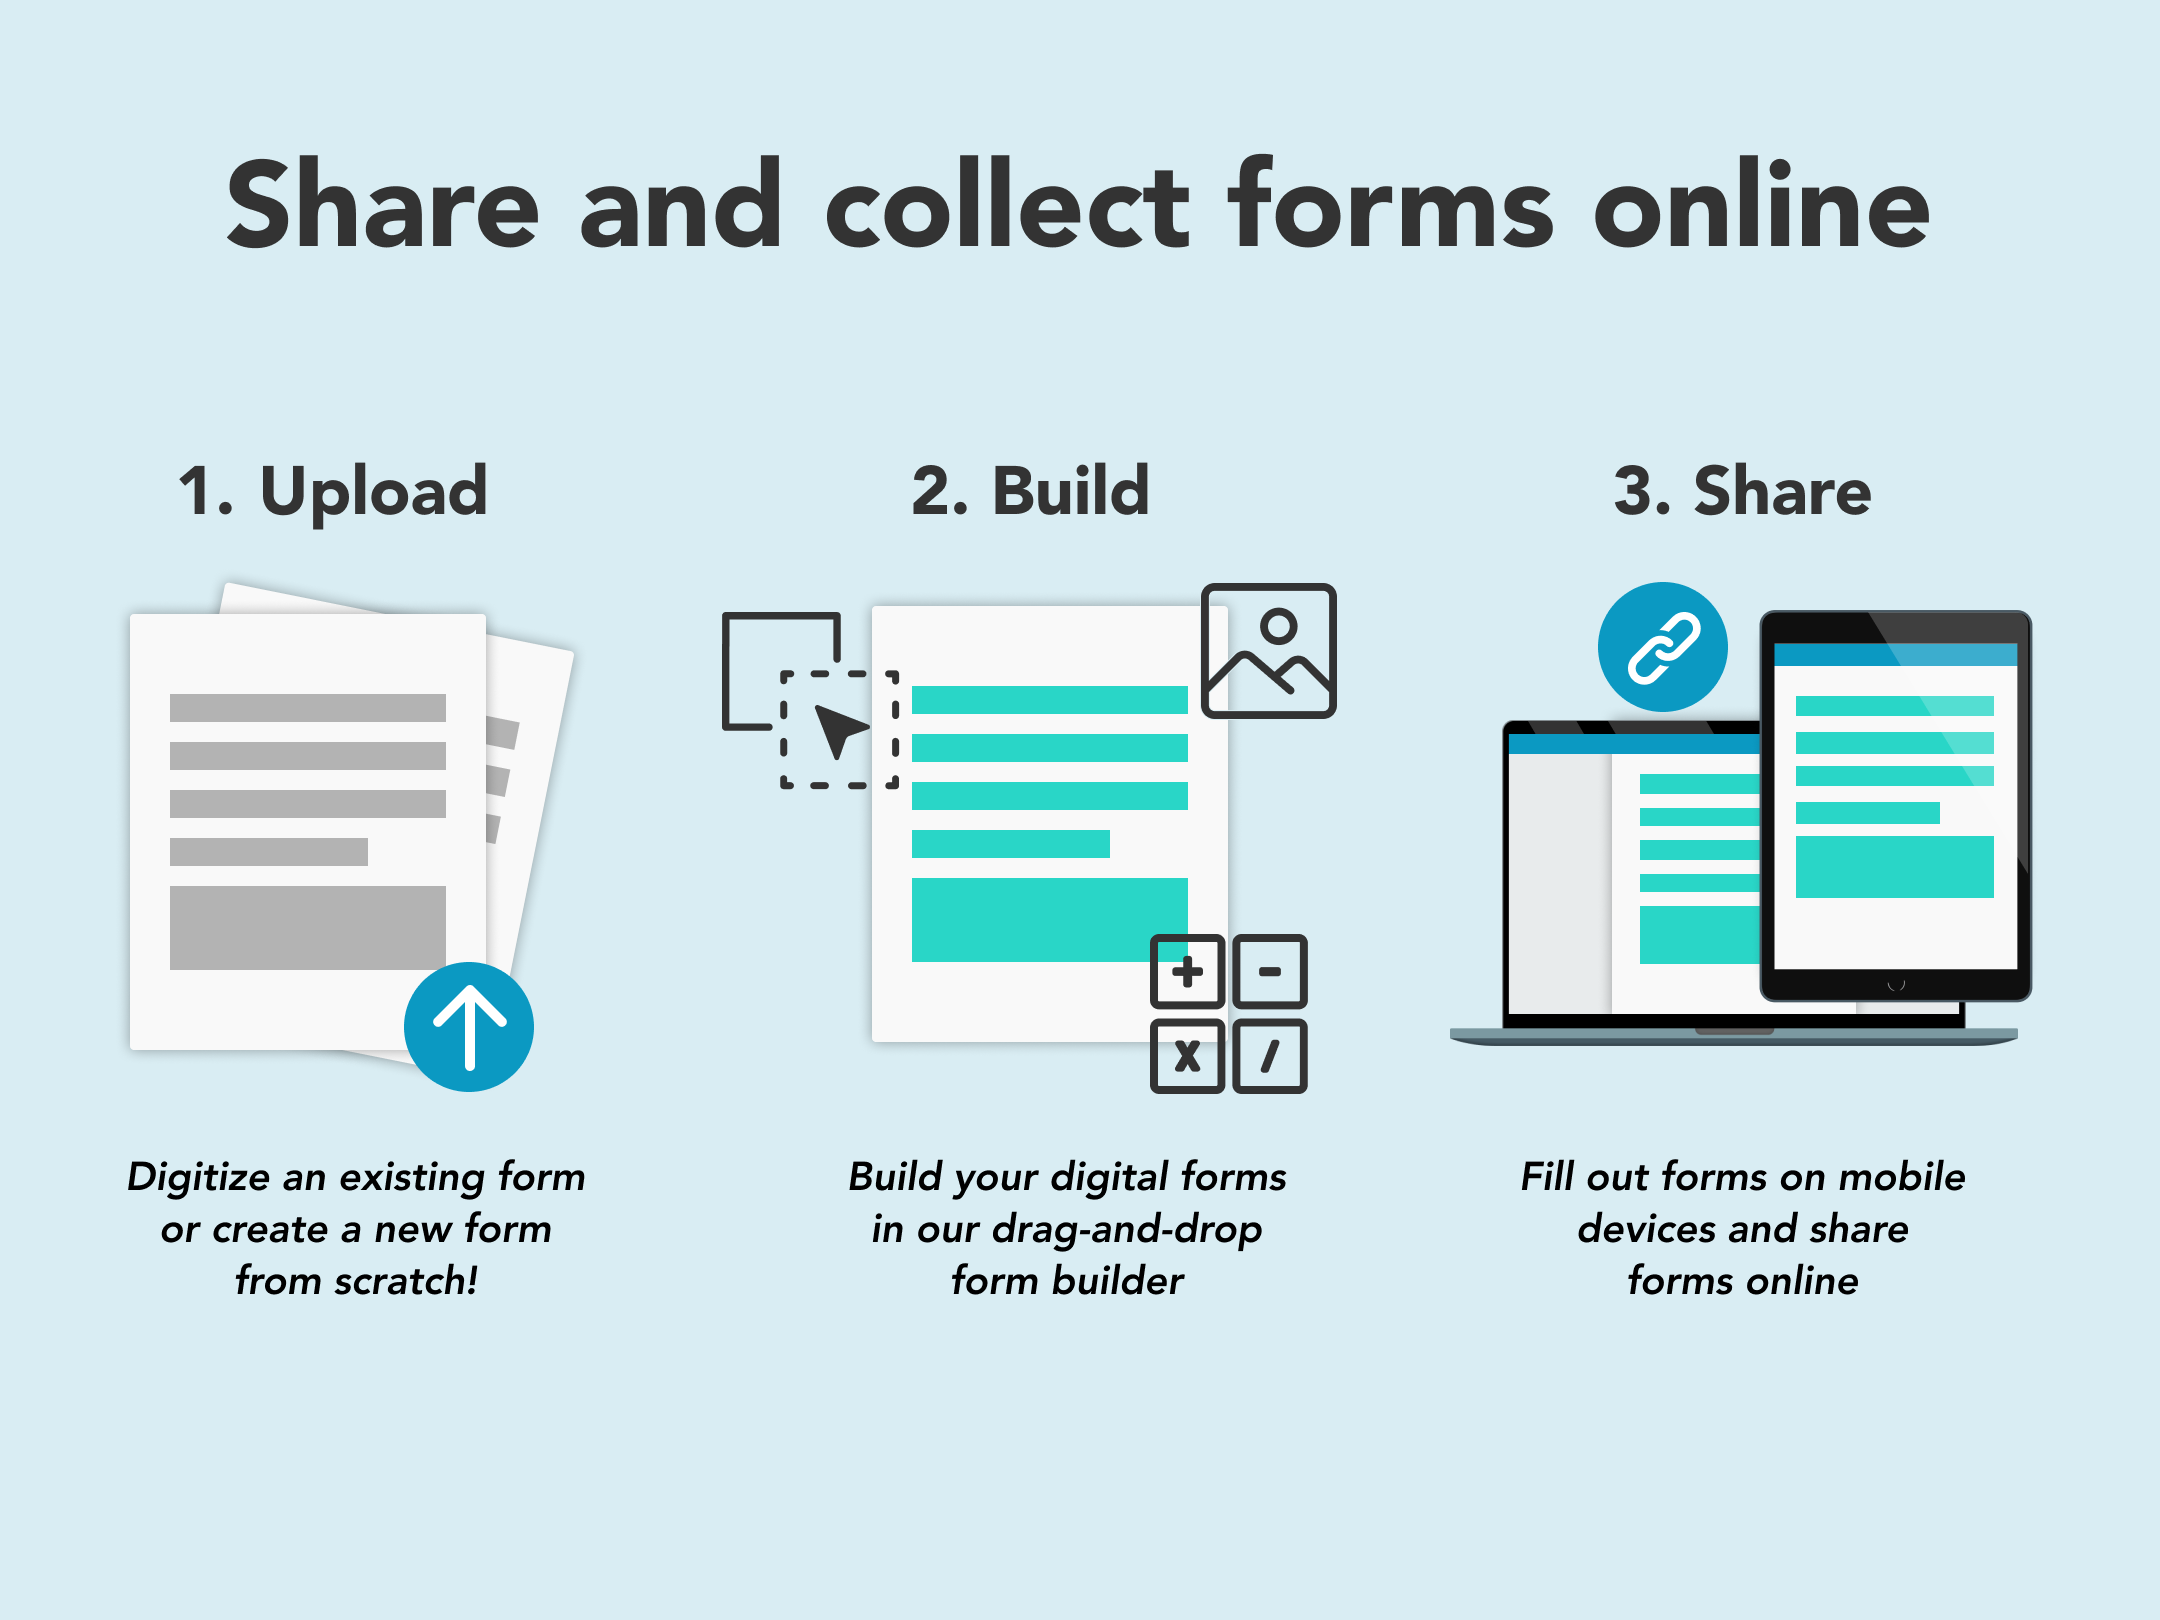 Share and collect your forms online with our Public Forms feature